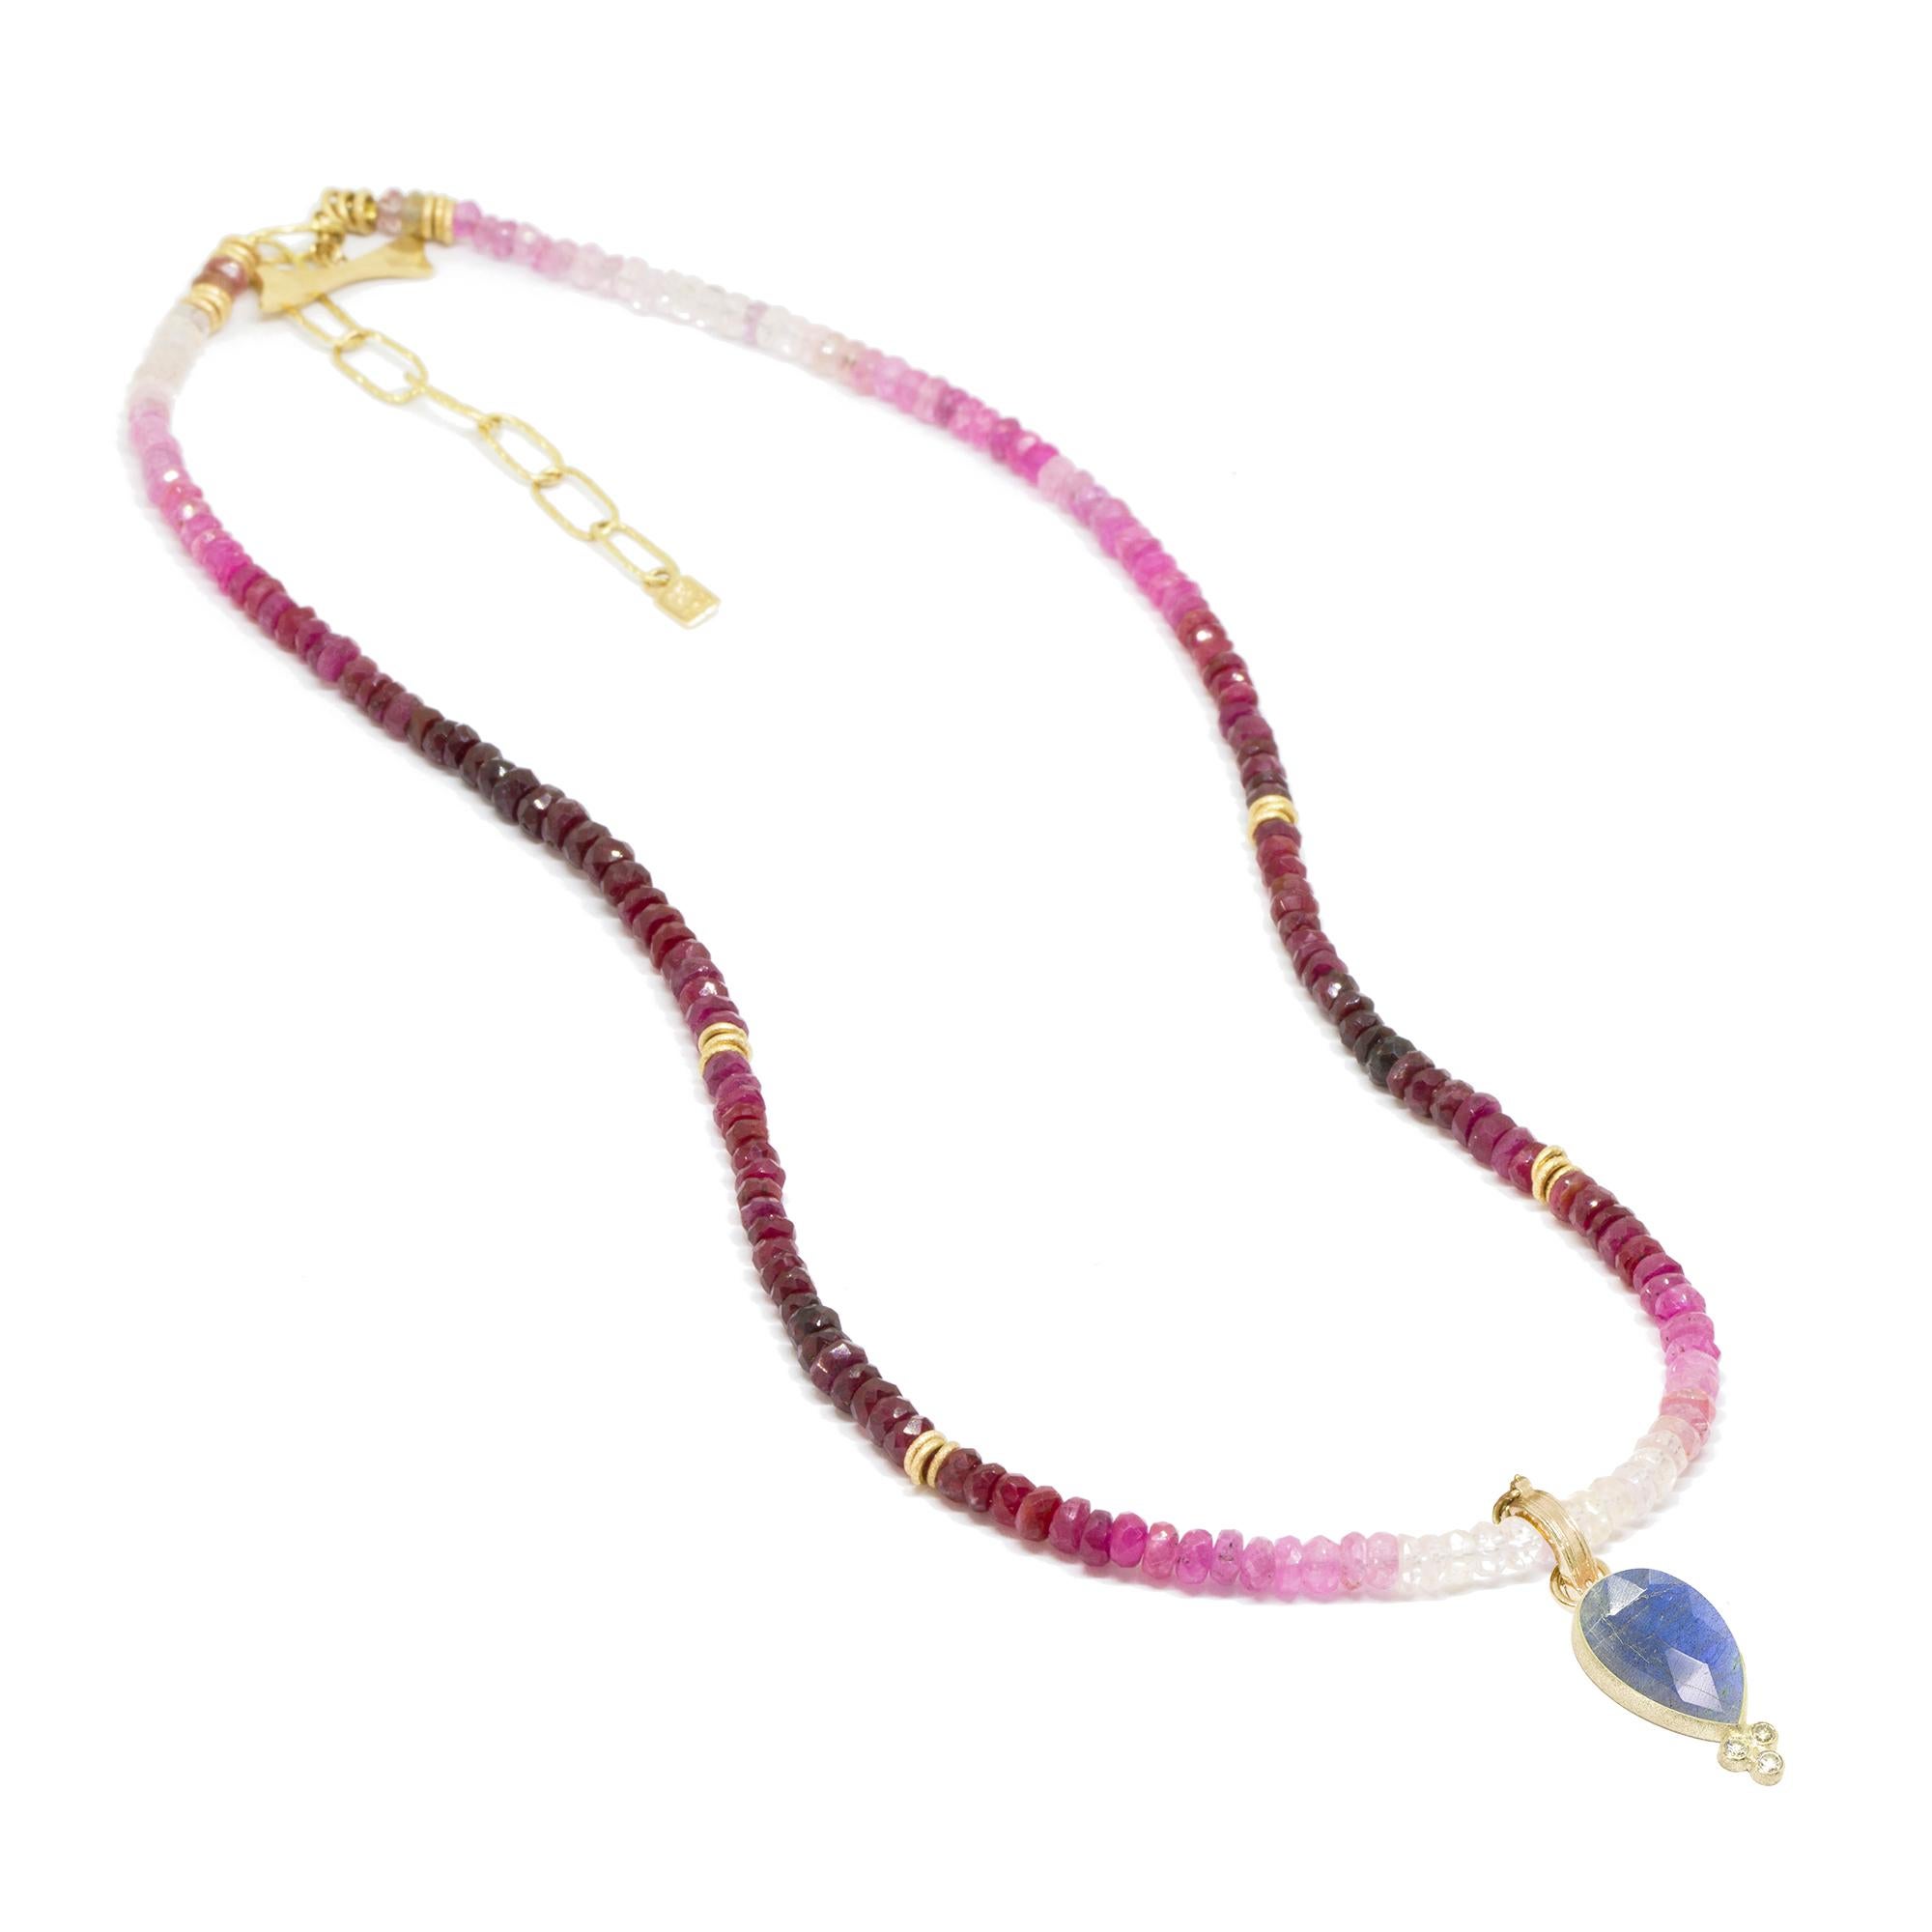 The best part about the Short Heritage Gold Necklette isn’t just that it can be worn long, doubled-up, or as a wrap bracelet (although that’s pretty cool). It’s that you can thread any of our Charms onto the ruby beads—have fun playing with all the